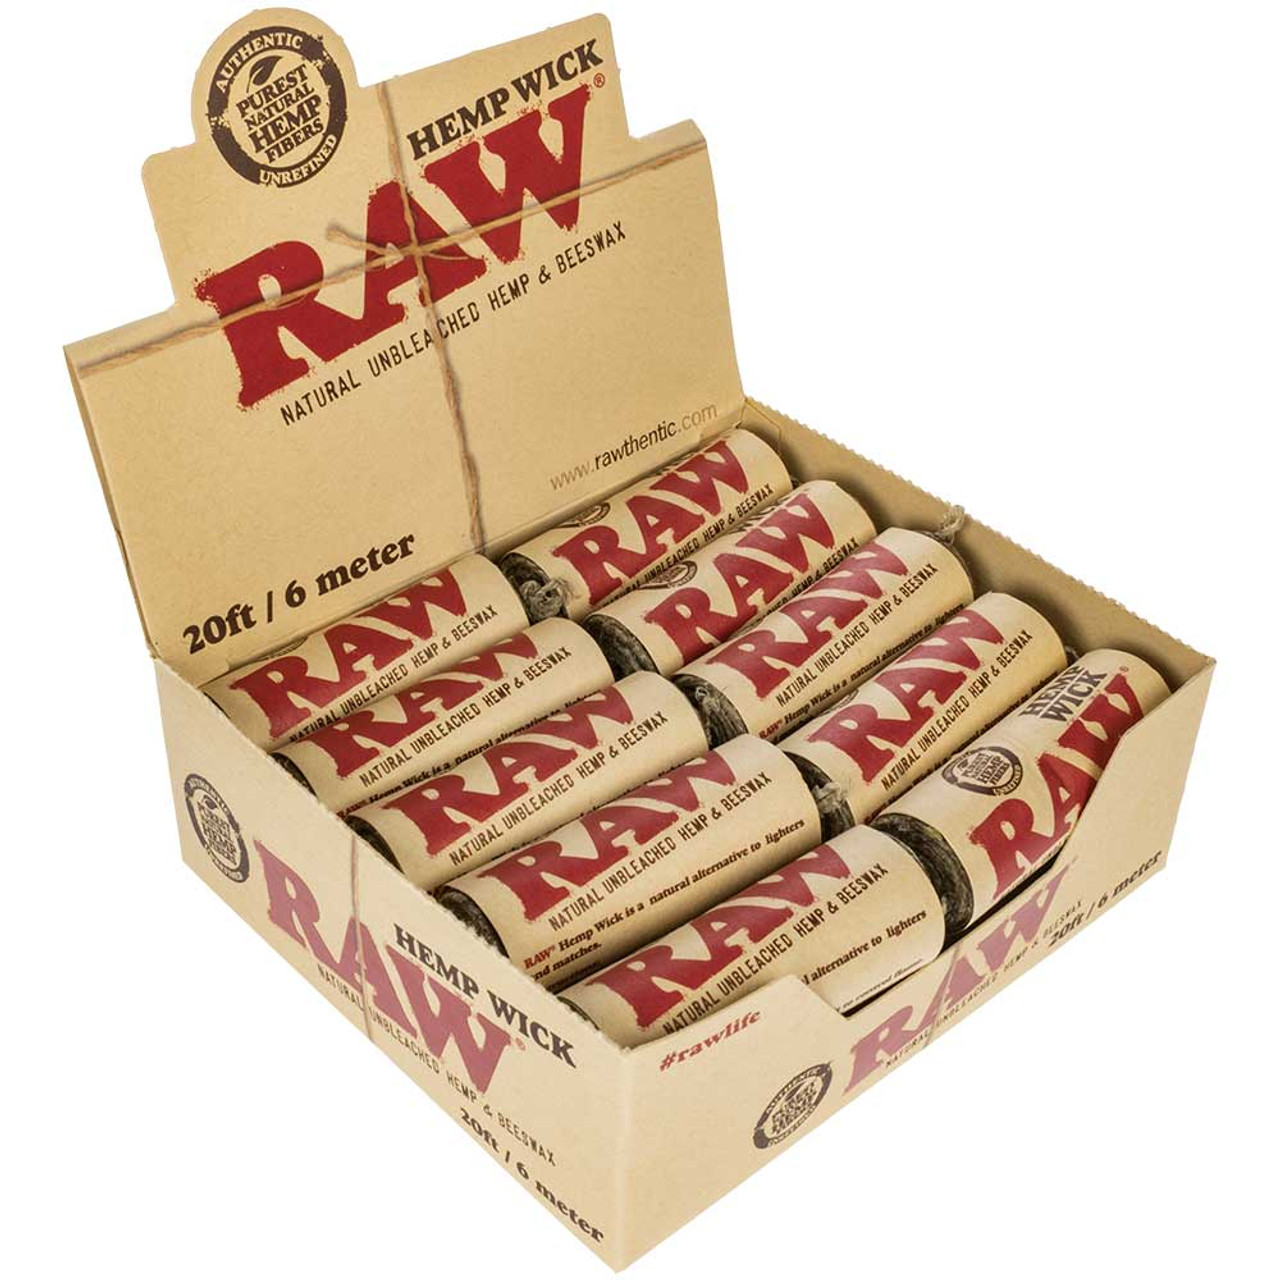 RAW Hemp Wick Roll (Available in 3m or 6m length) Natural